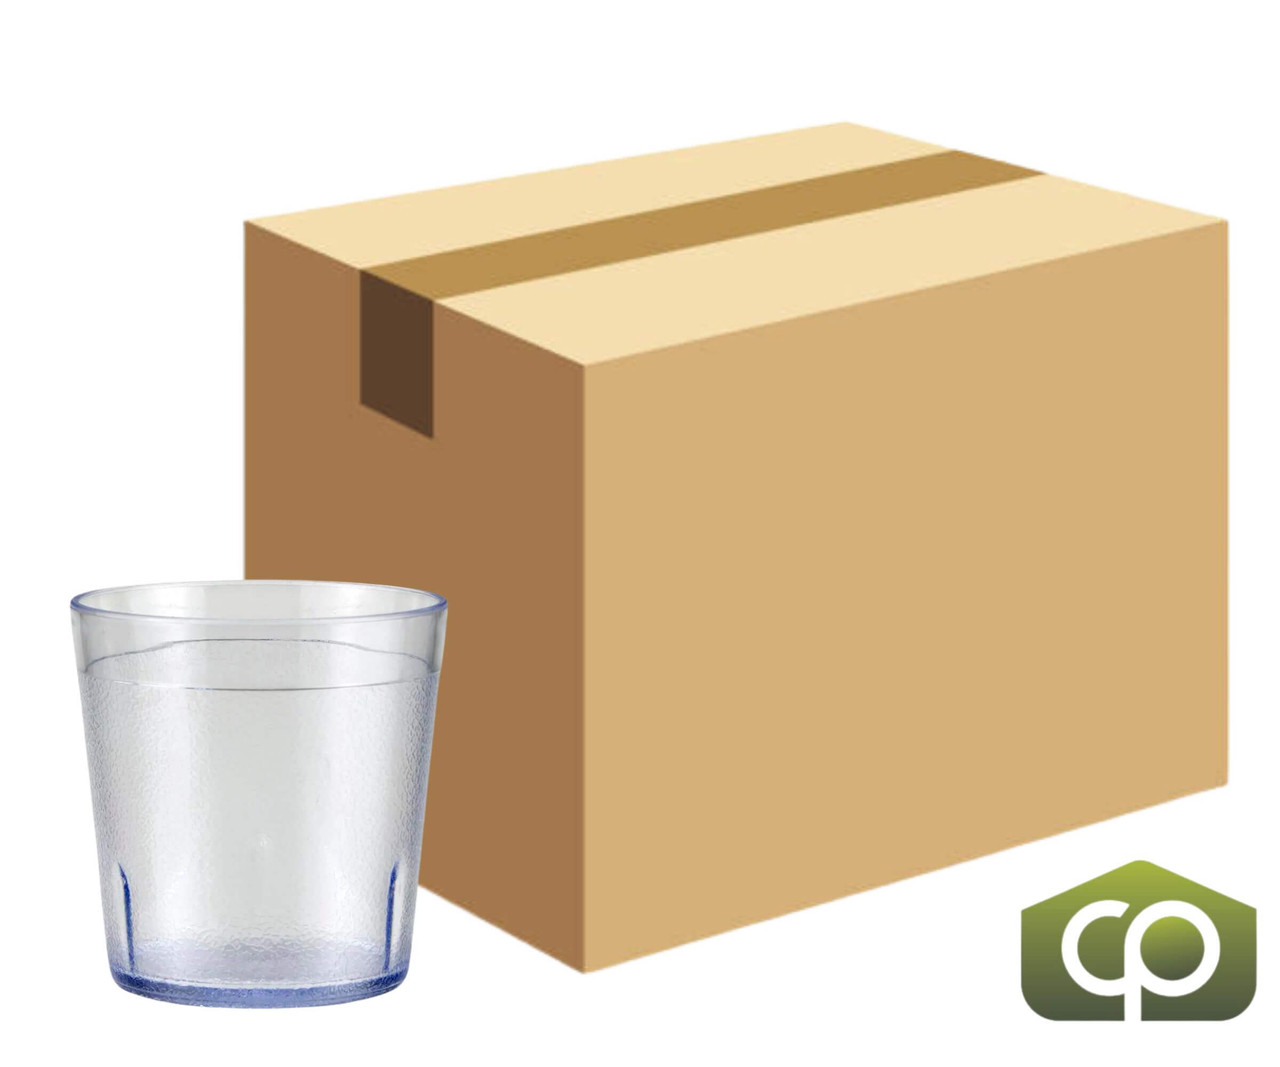 GET 10 oz Clear Textured Plastic Juice Tumbler (72/Case) - Durable SAN Material - Chicken Pieces